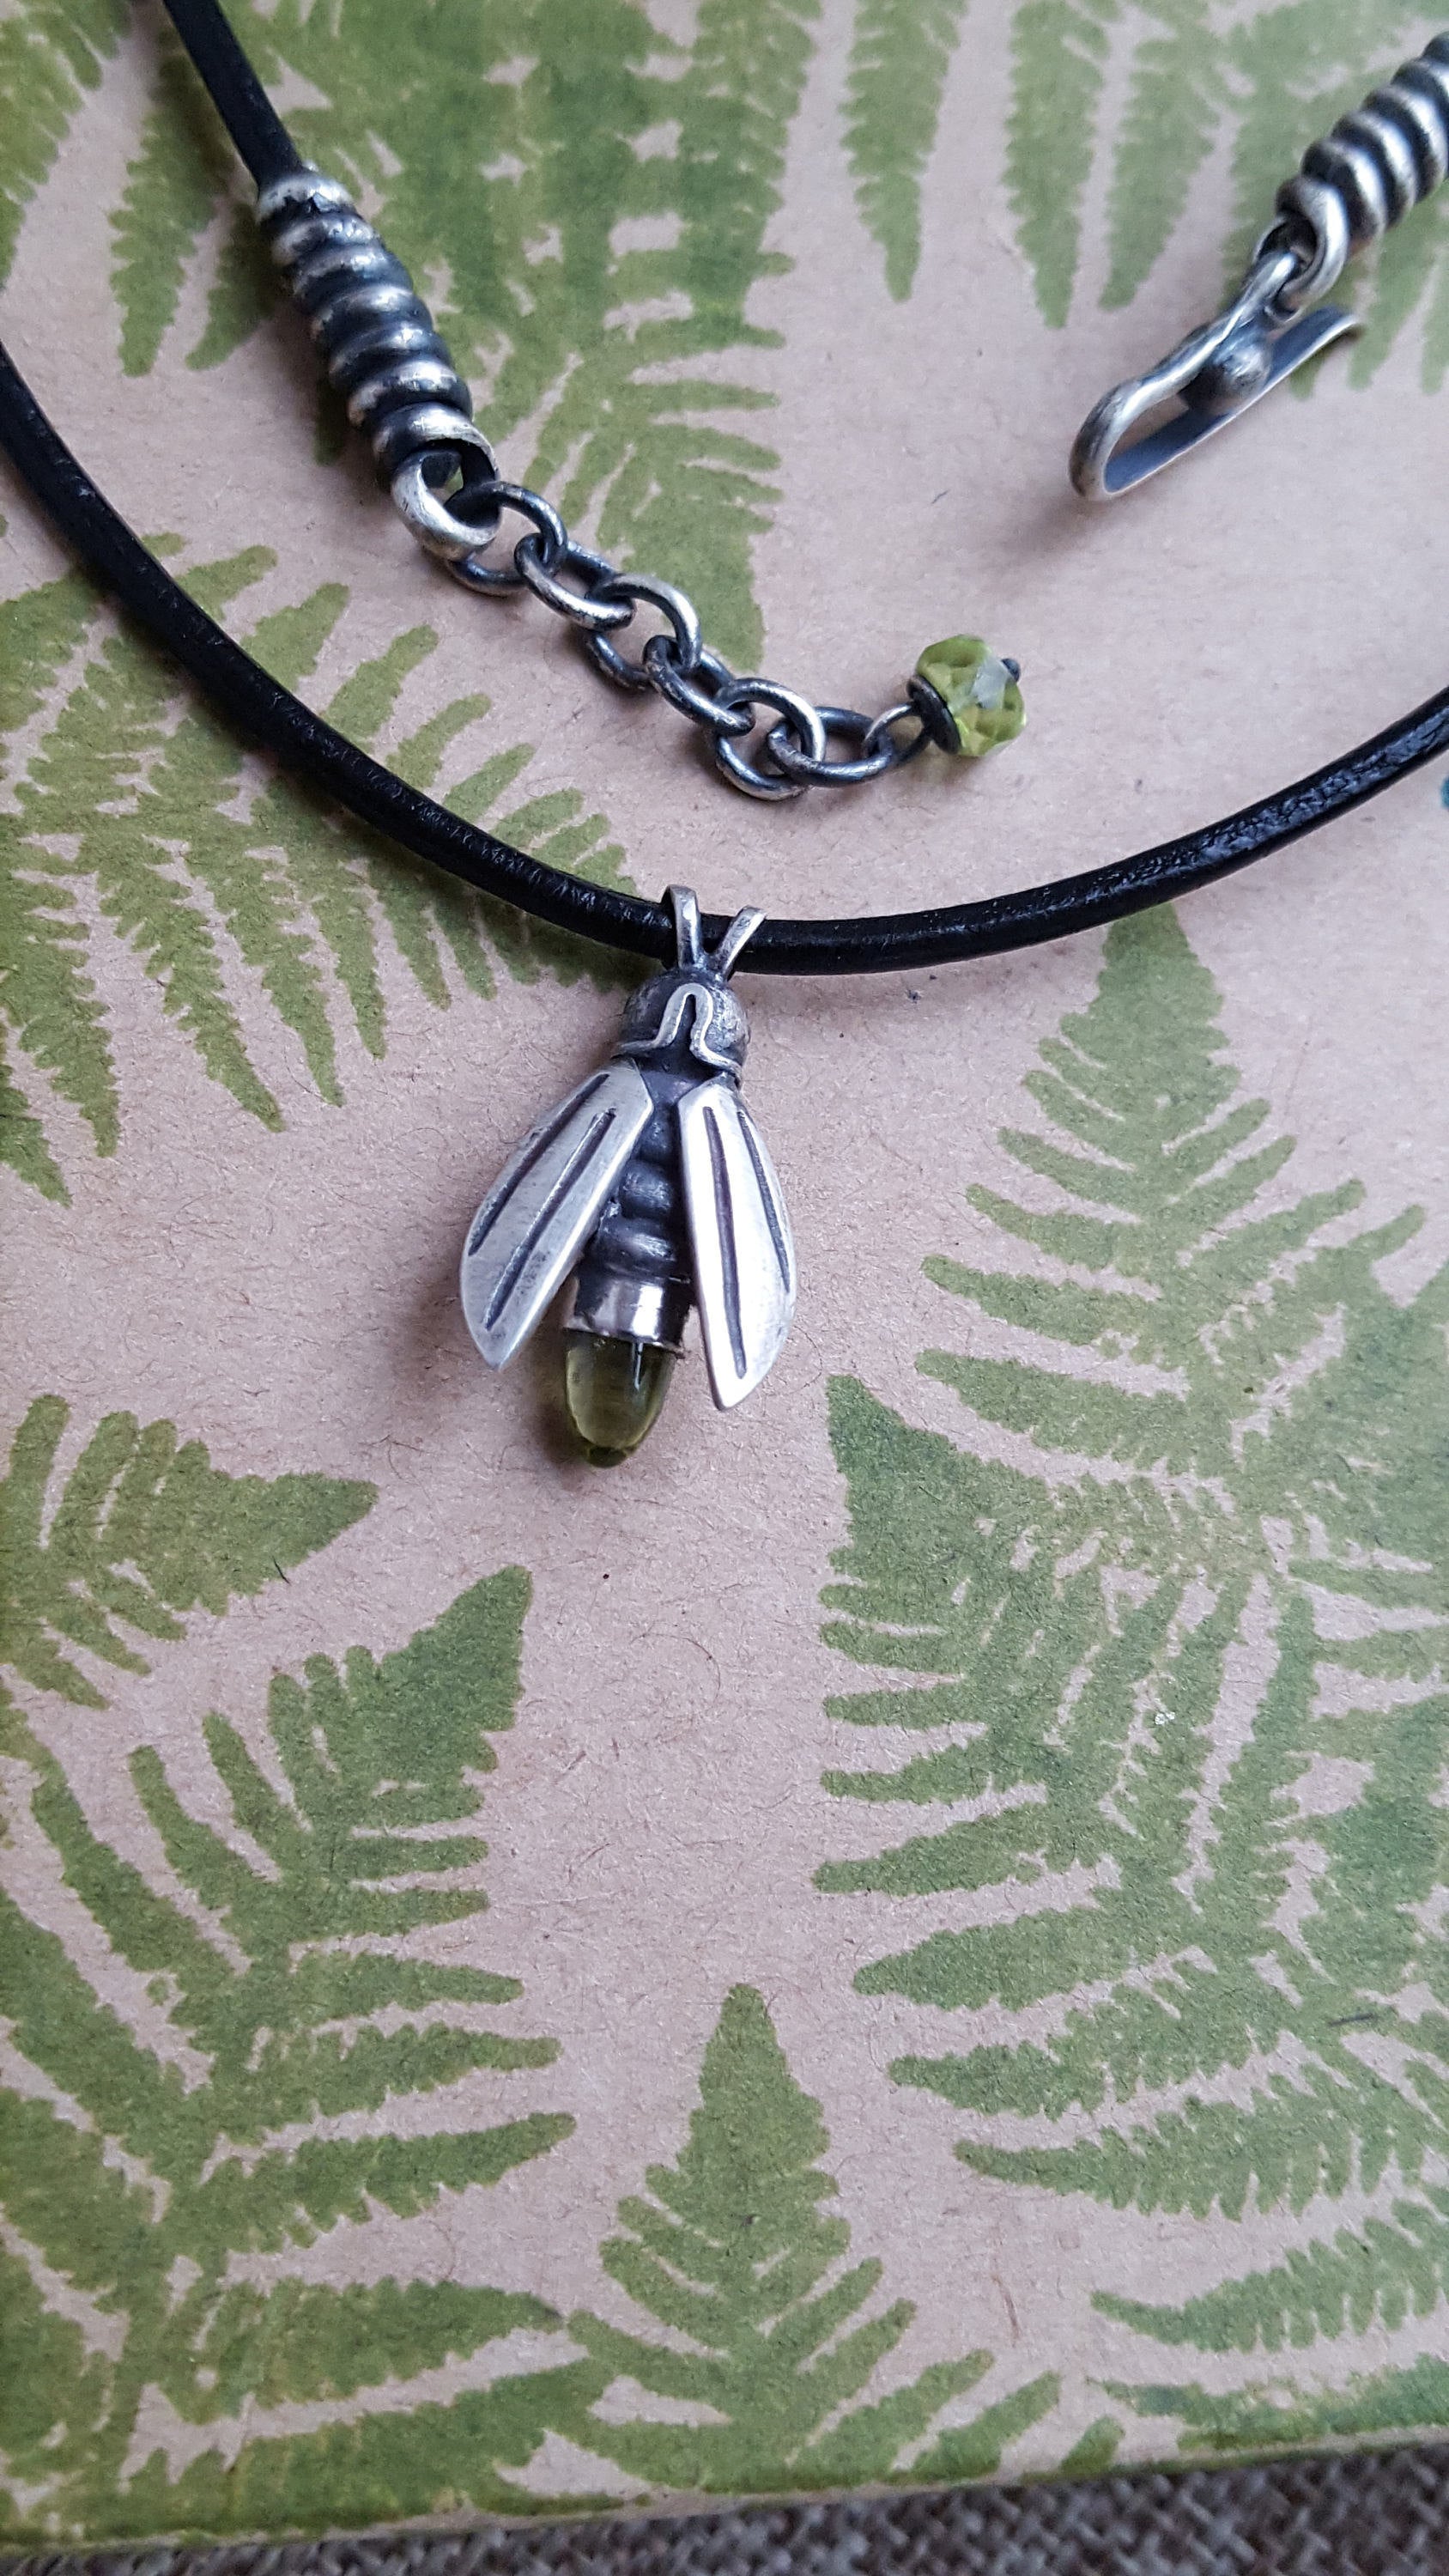 Firefly Amulet on Black Leather, Sterling and Peridot